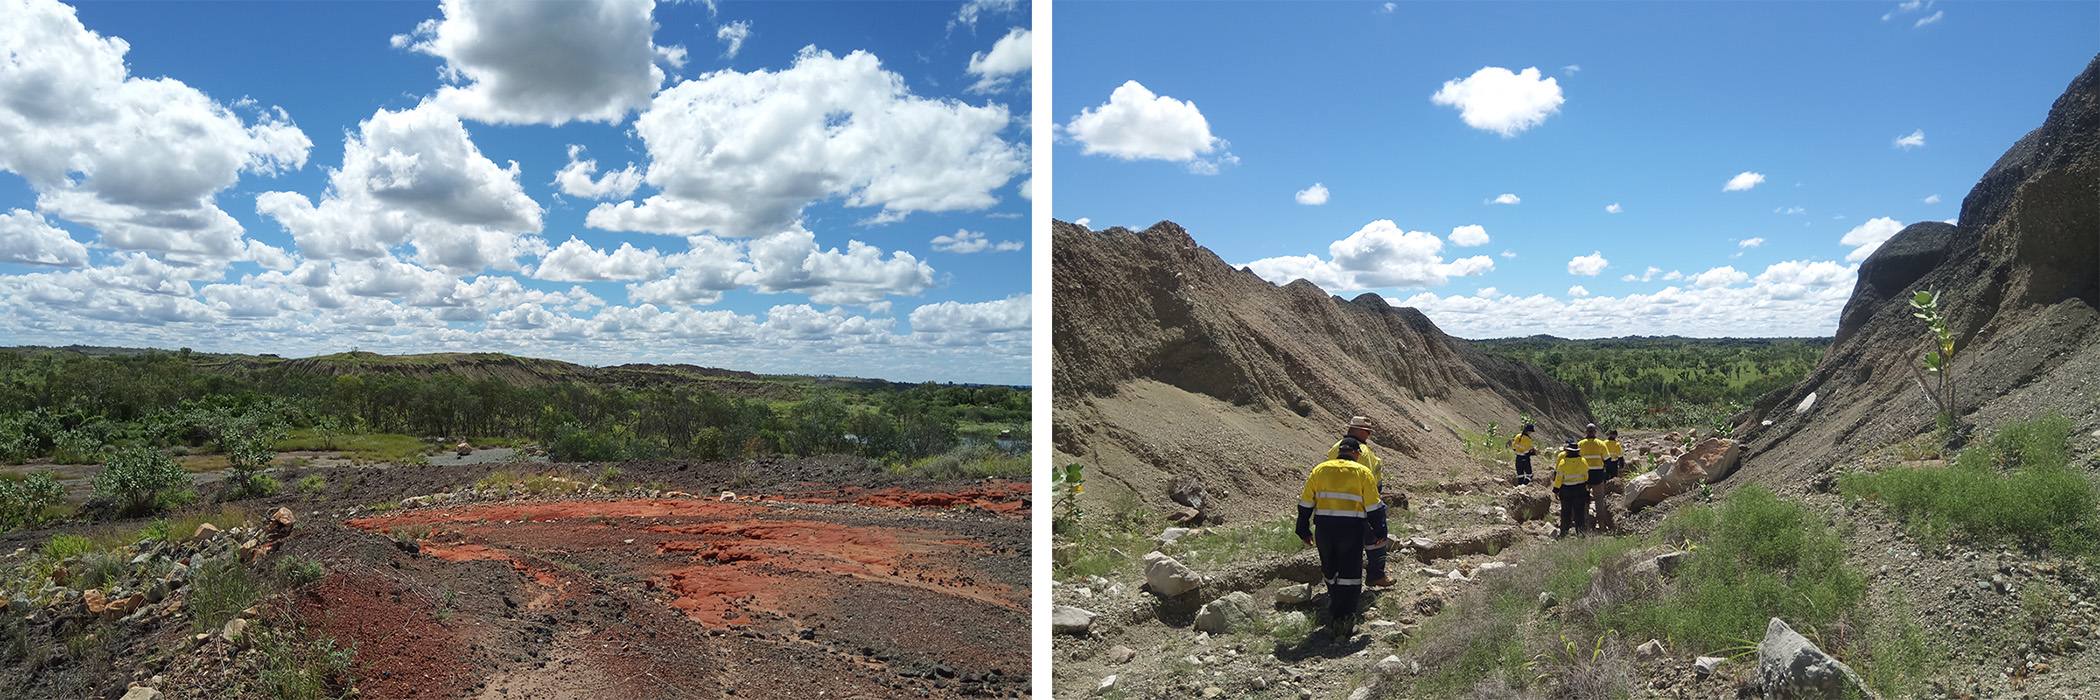 Left - Ellendale Mine site landscape in the day ; right - group walking through the abandoned mine site